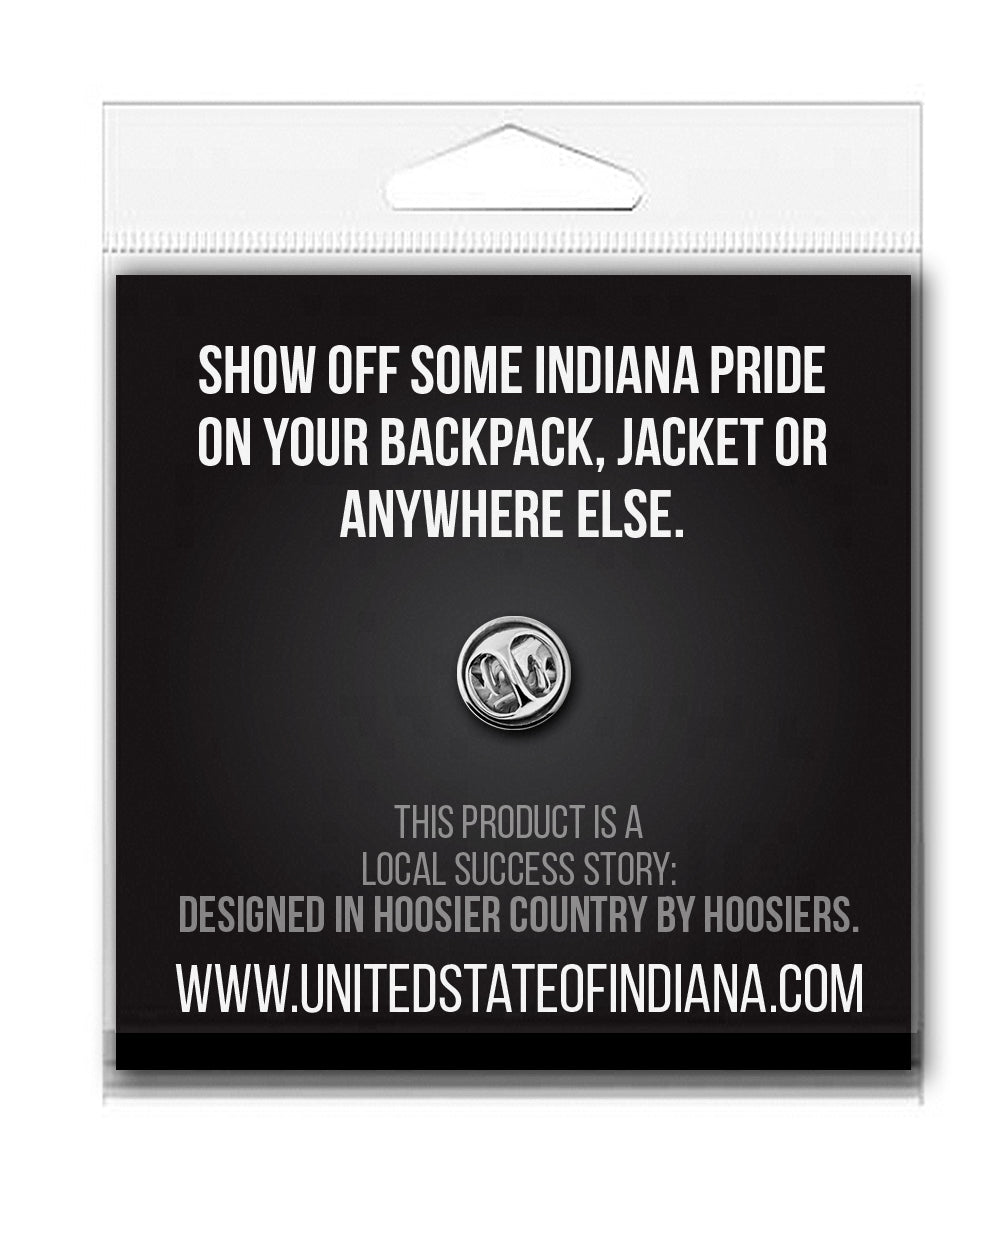 Peony Enamel Pin - United State of Indiana: Indiana-Made T-Shirts and Gifts